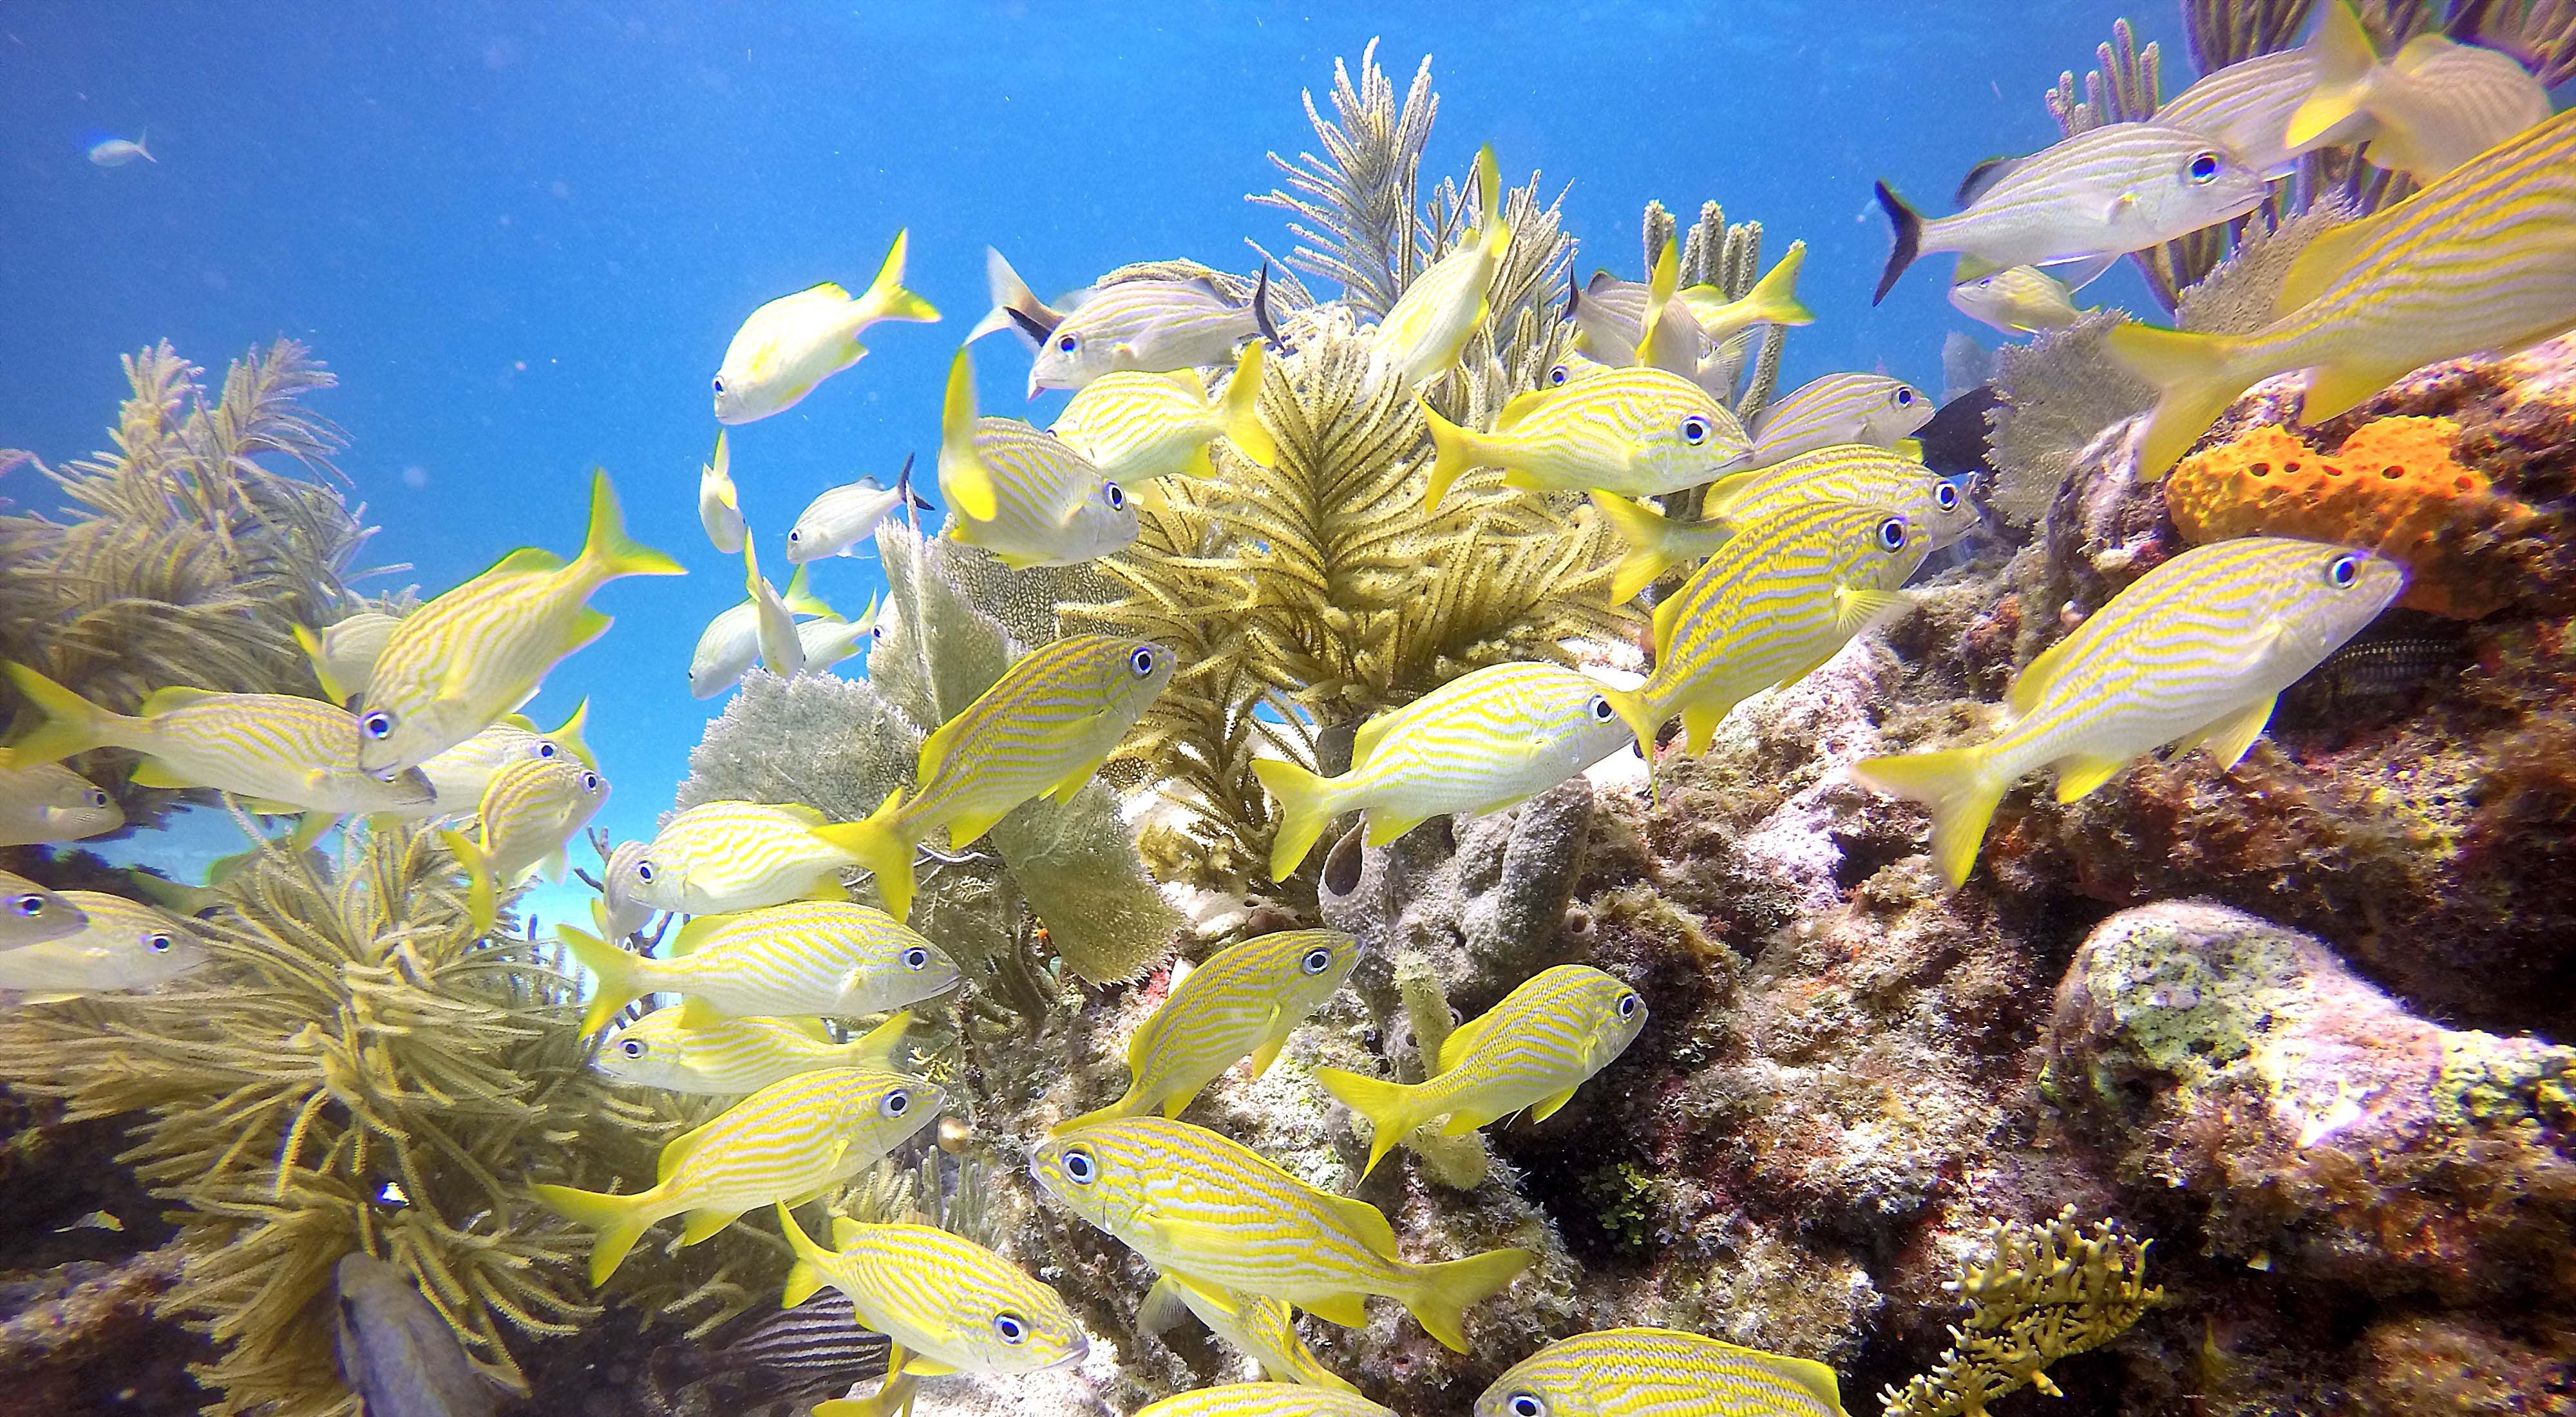 Closeup of a variety of brightly colored fish swimming in the Florida coral reef.